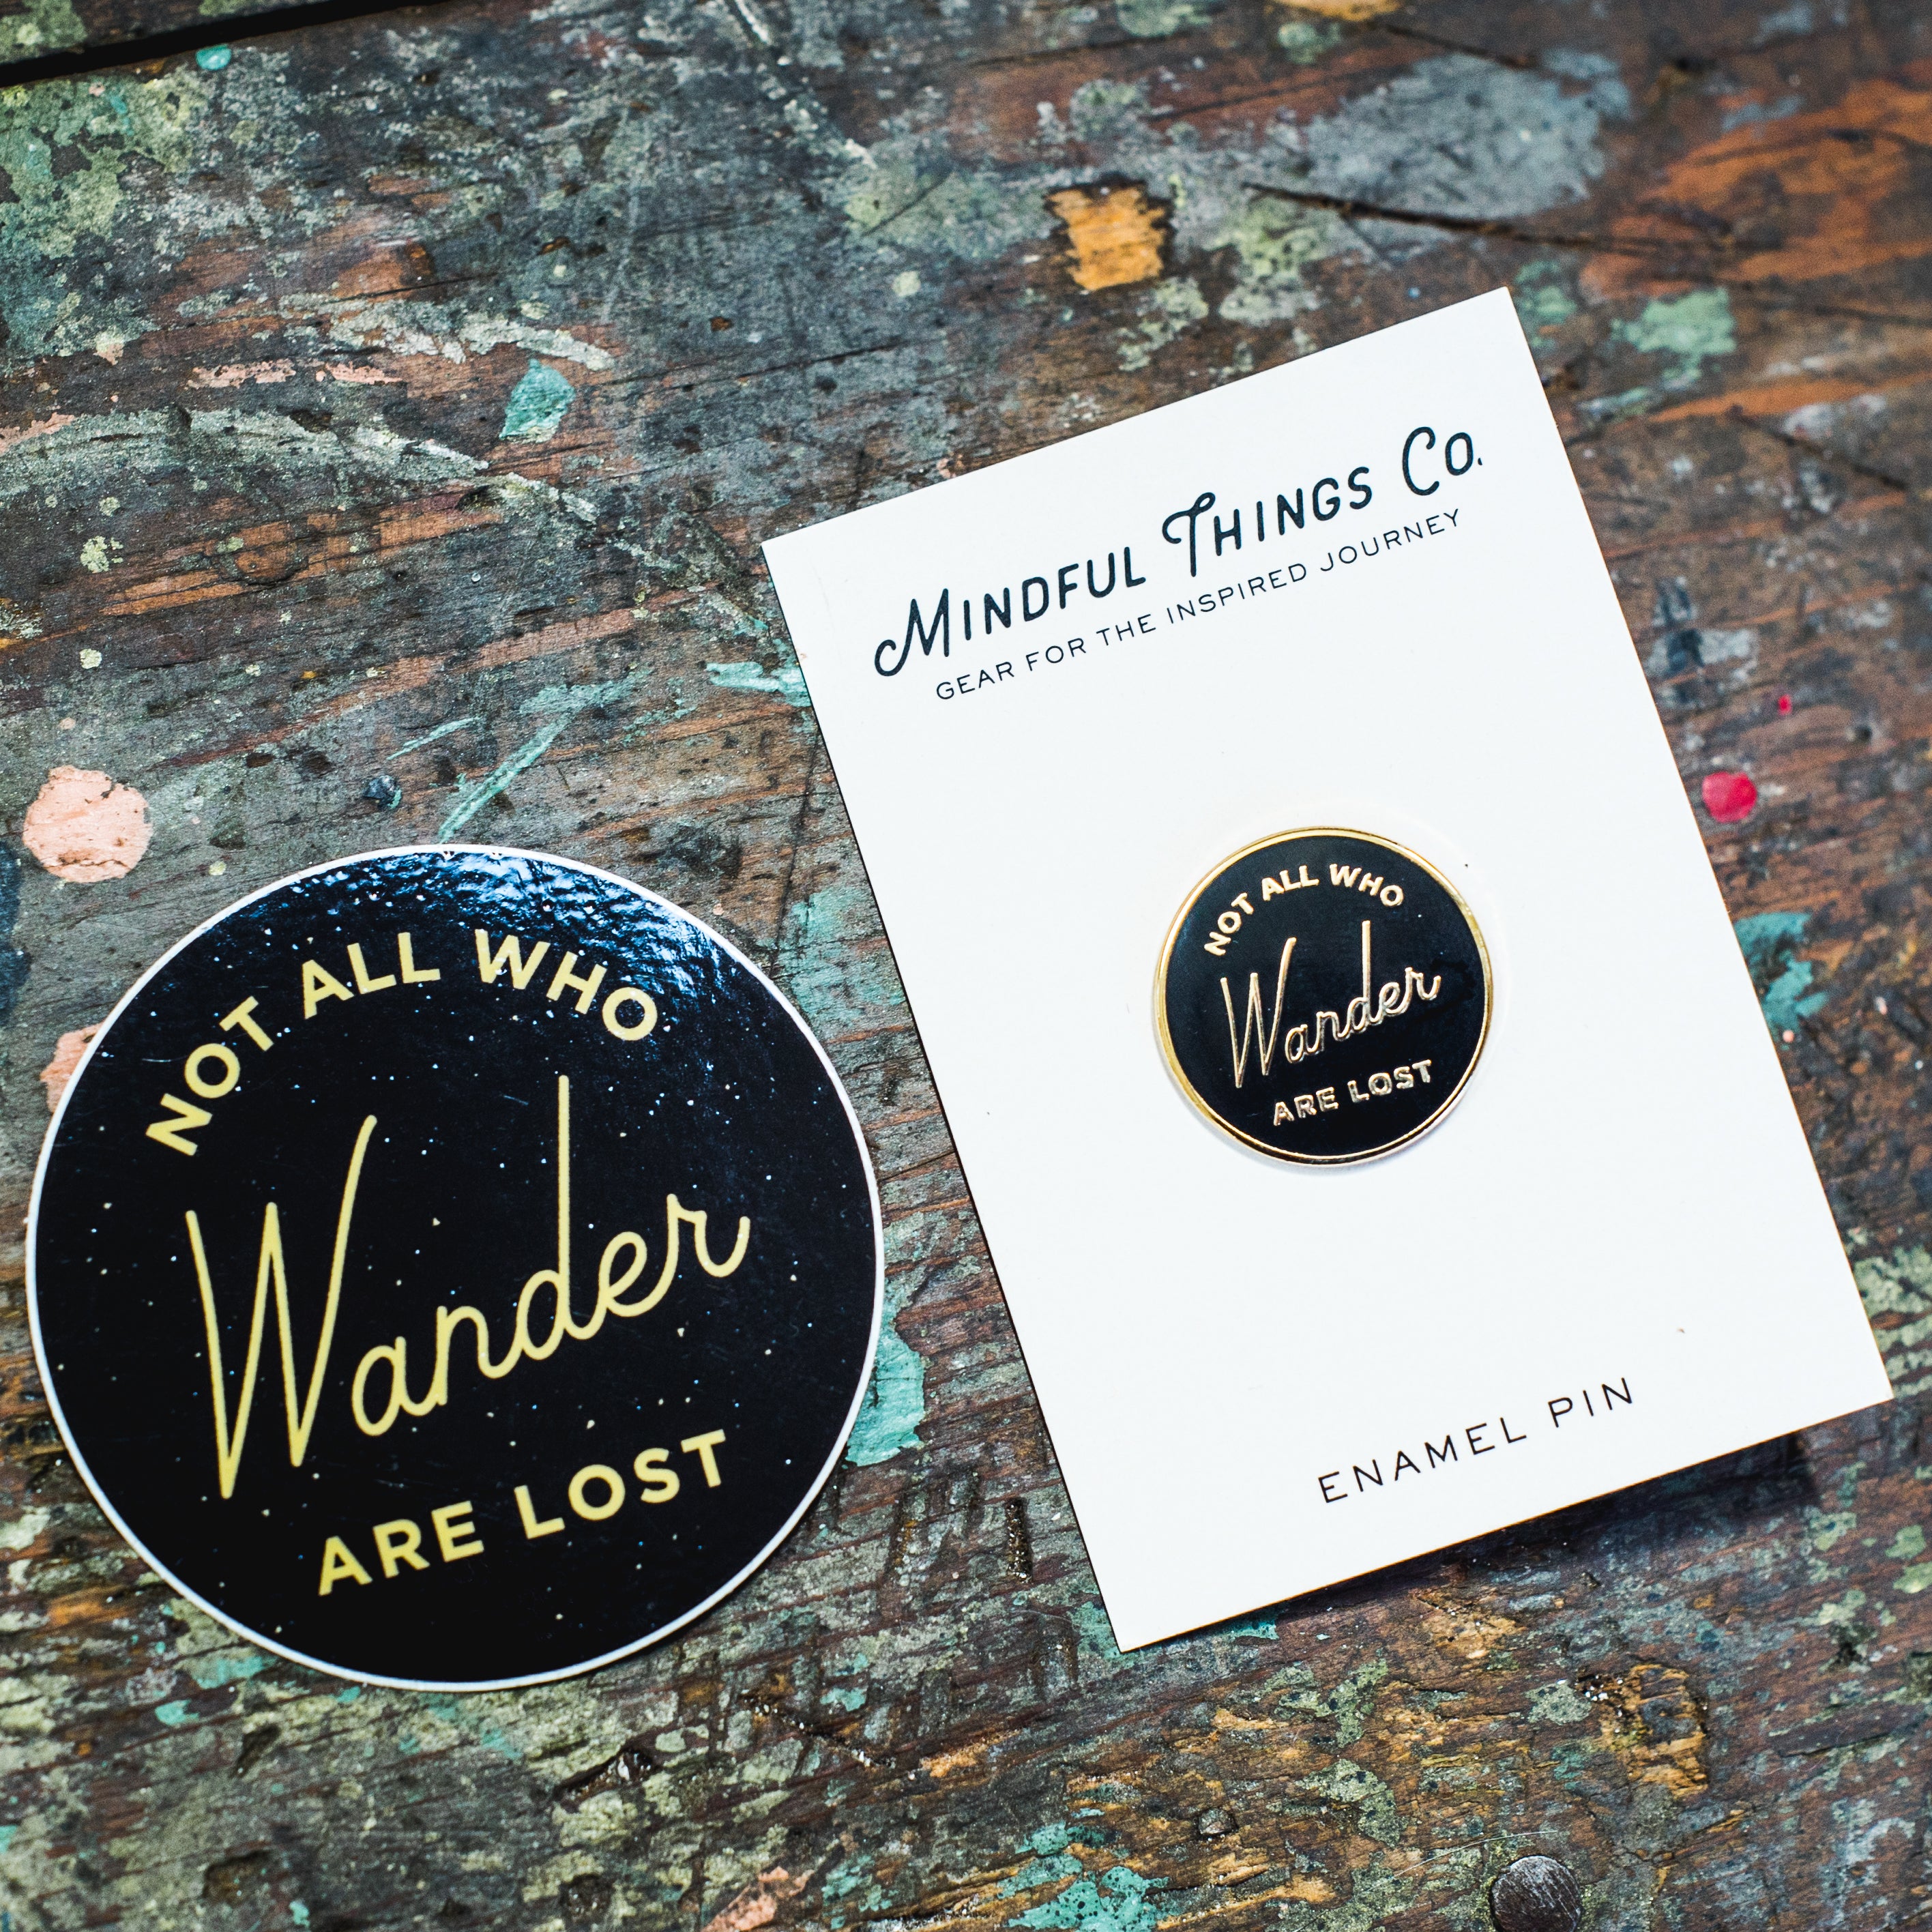 not all who wander are lost